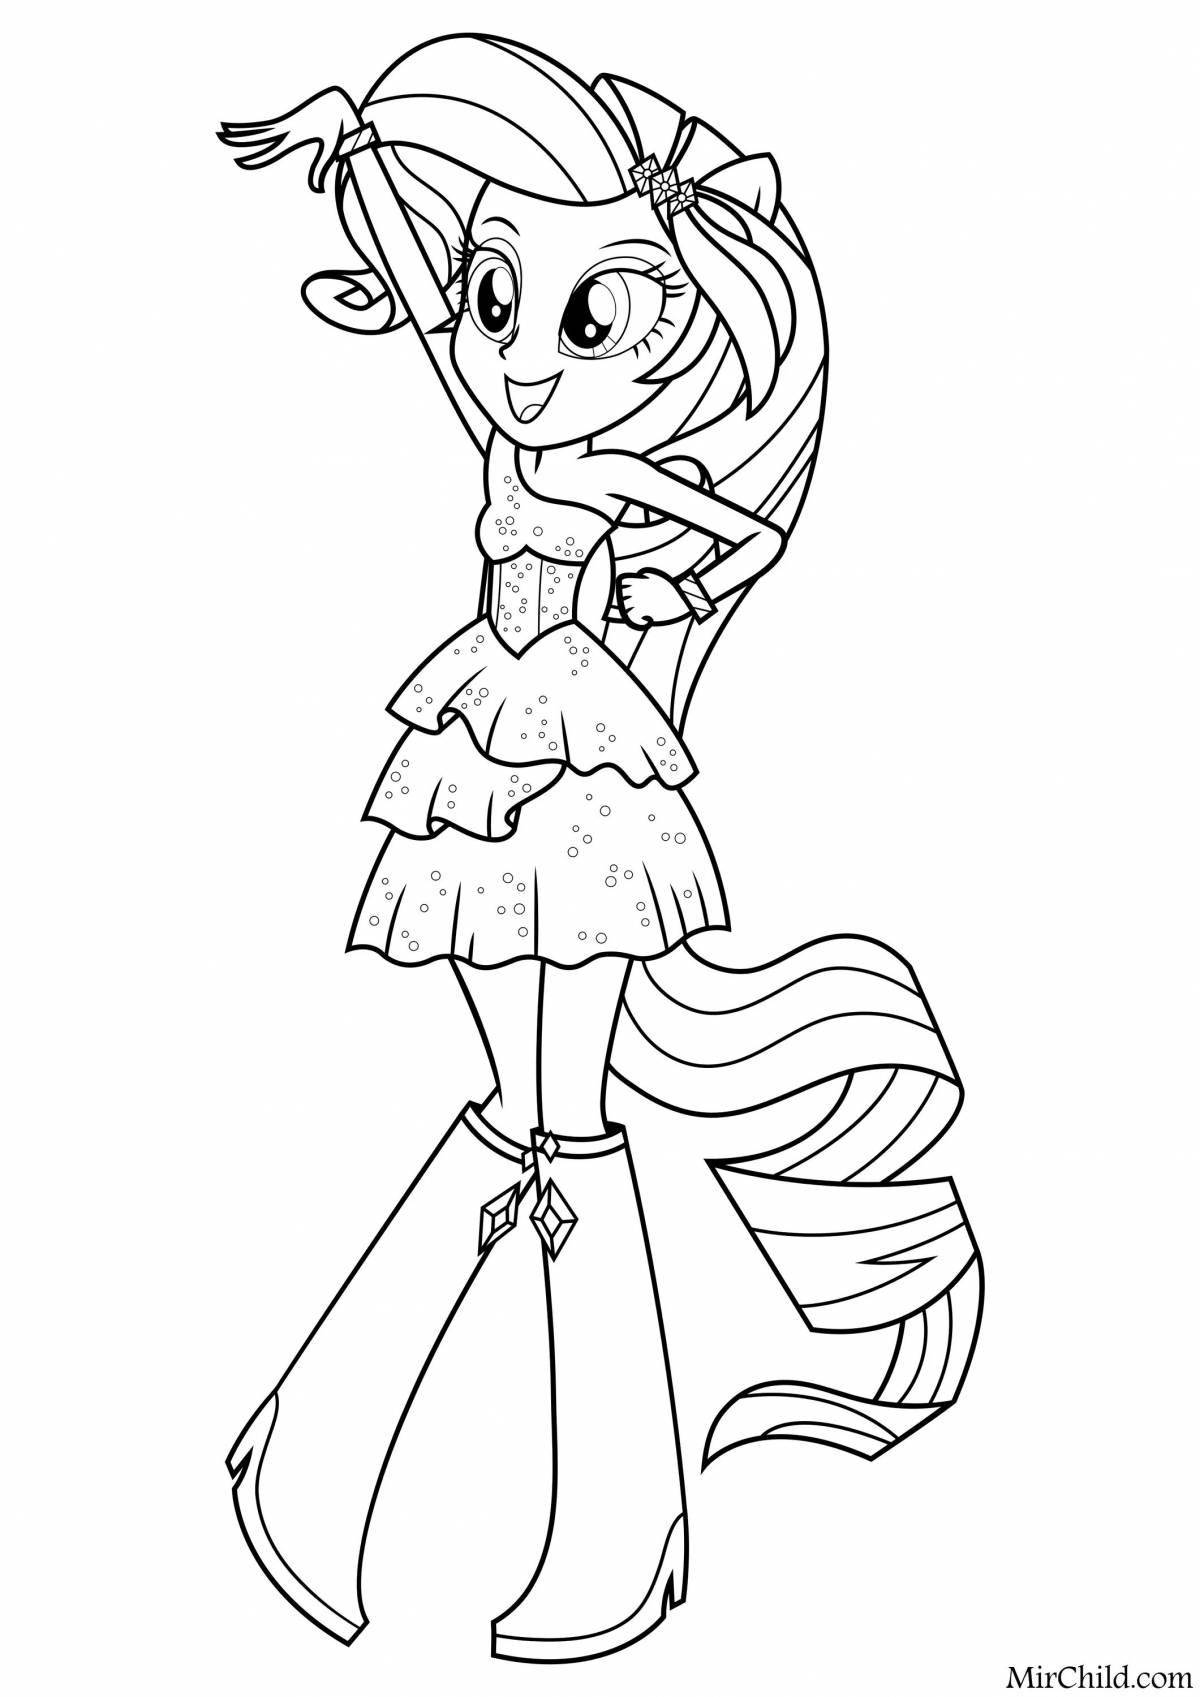 Equestria glamor girls coloring page